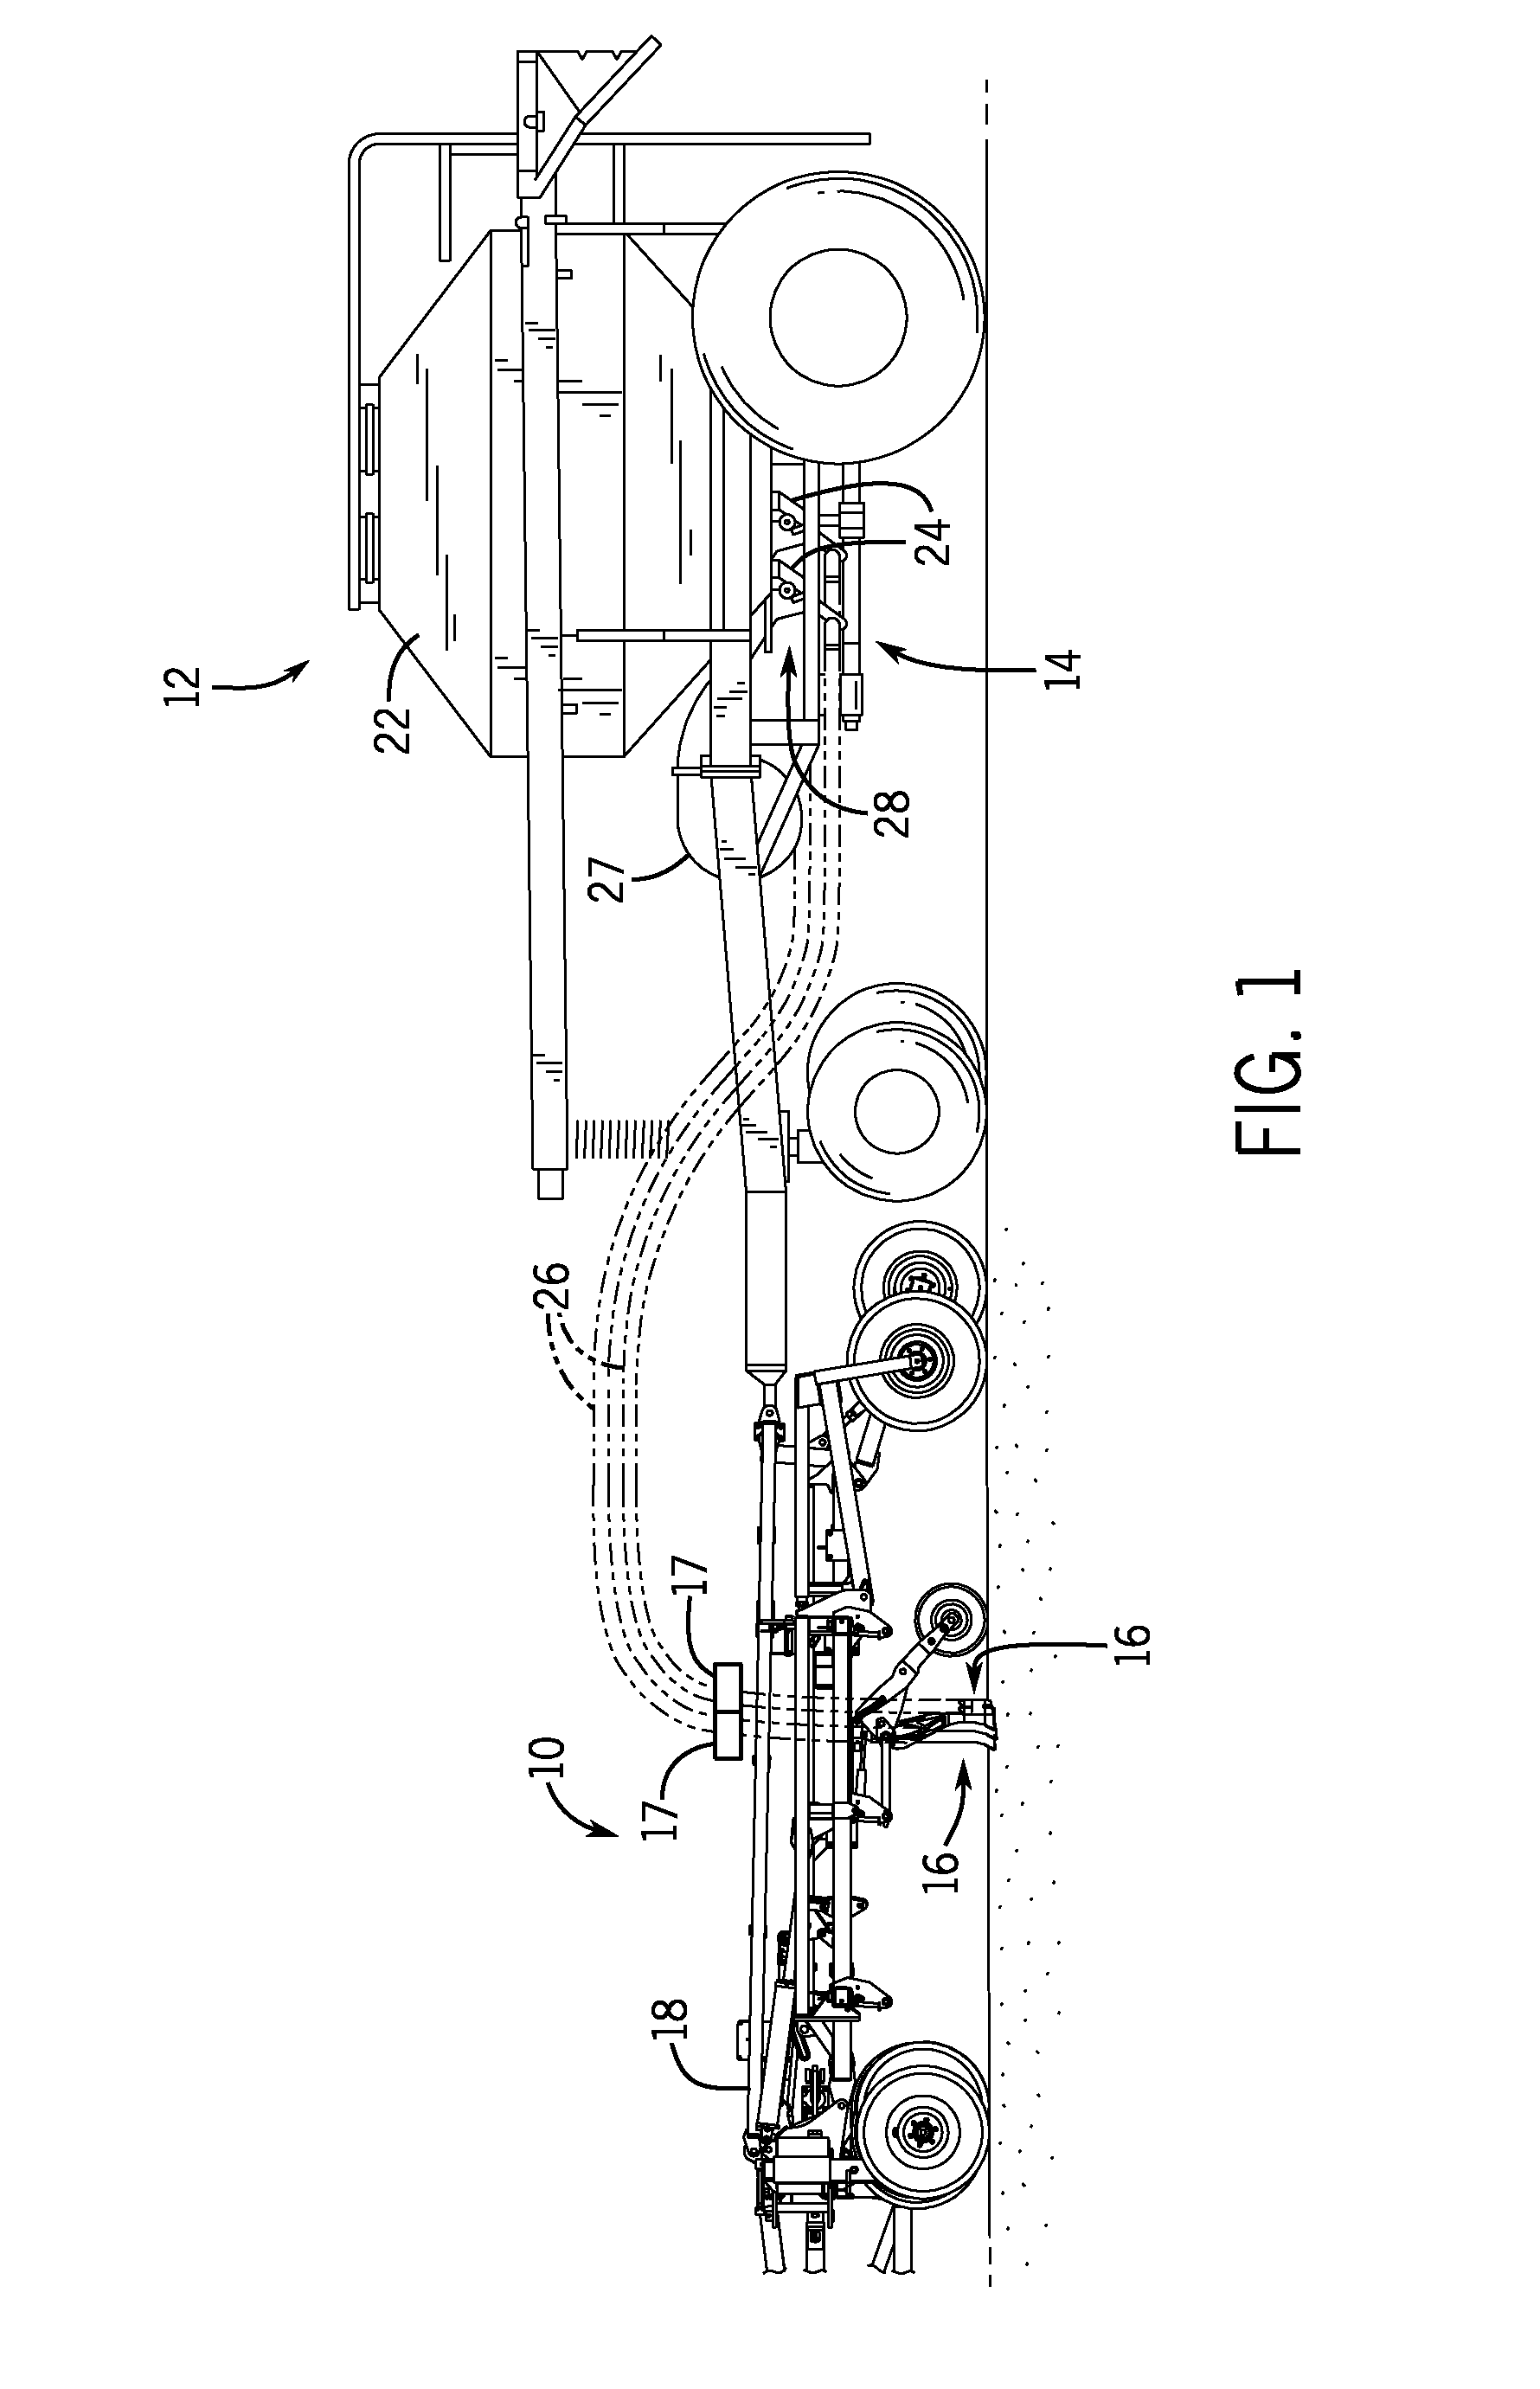 Sectional control calibration system and method